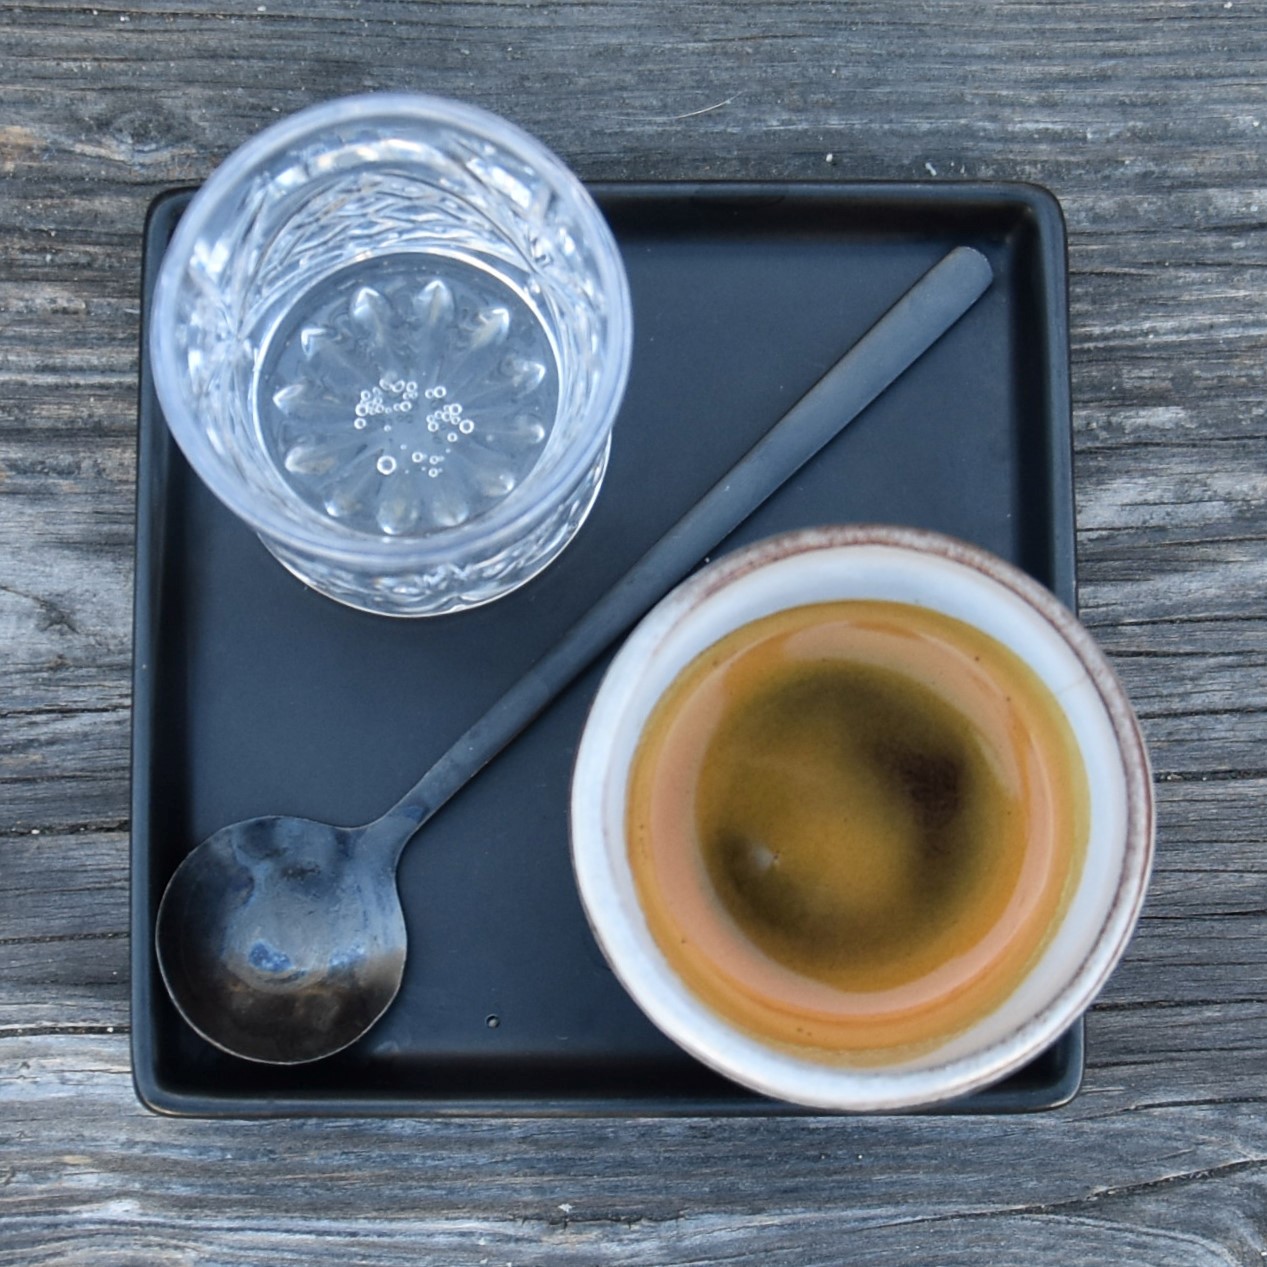 My espresso, a single-origin from East Timor, roasted by Devout Coffee and served at the coffee shop in Niles, along with a glass of water, presented on a square, metal tray, with a spoon laid diagonally between espresso and glass.